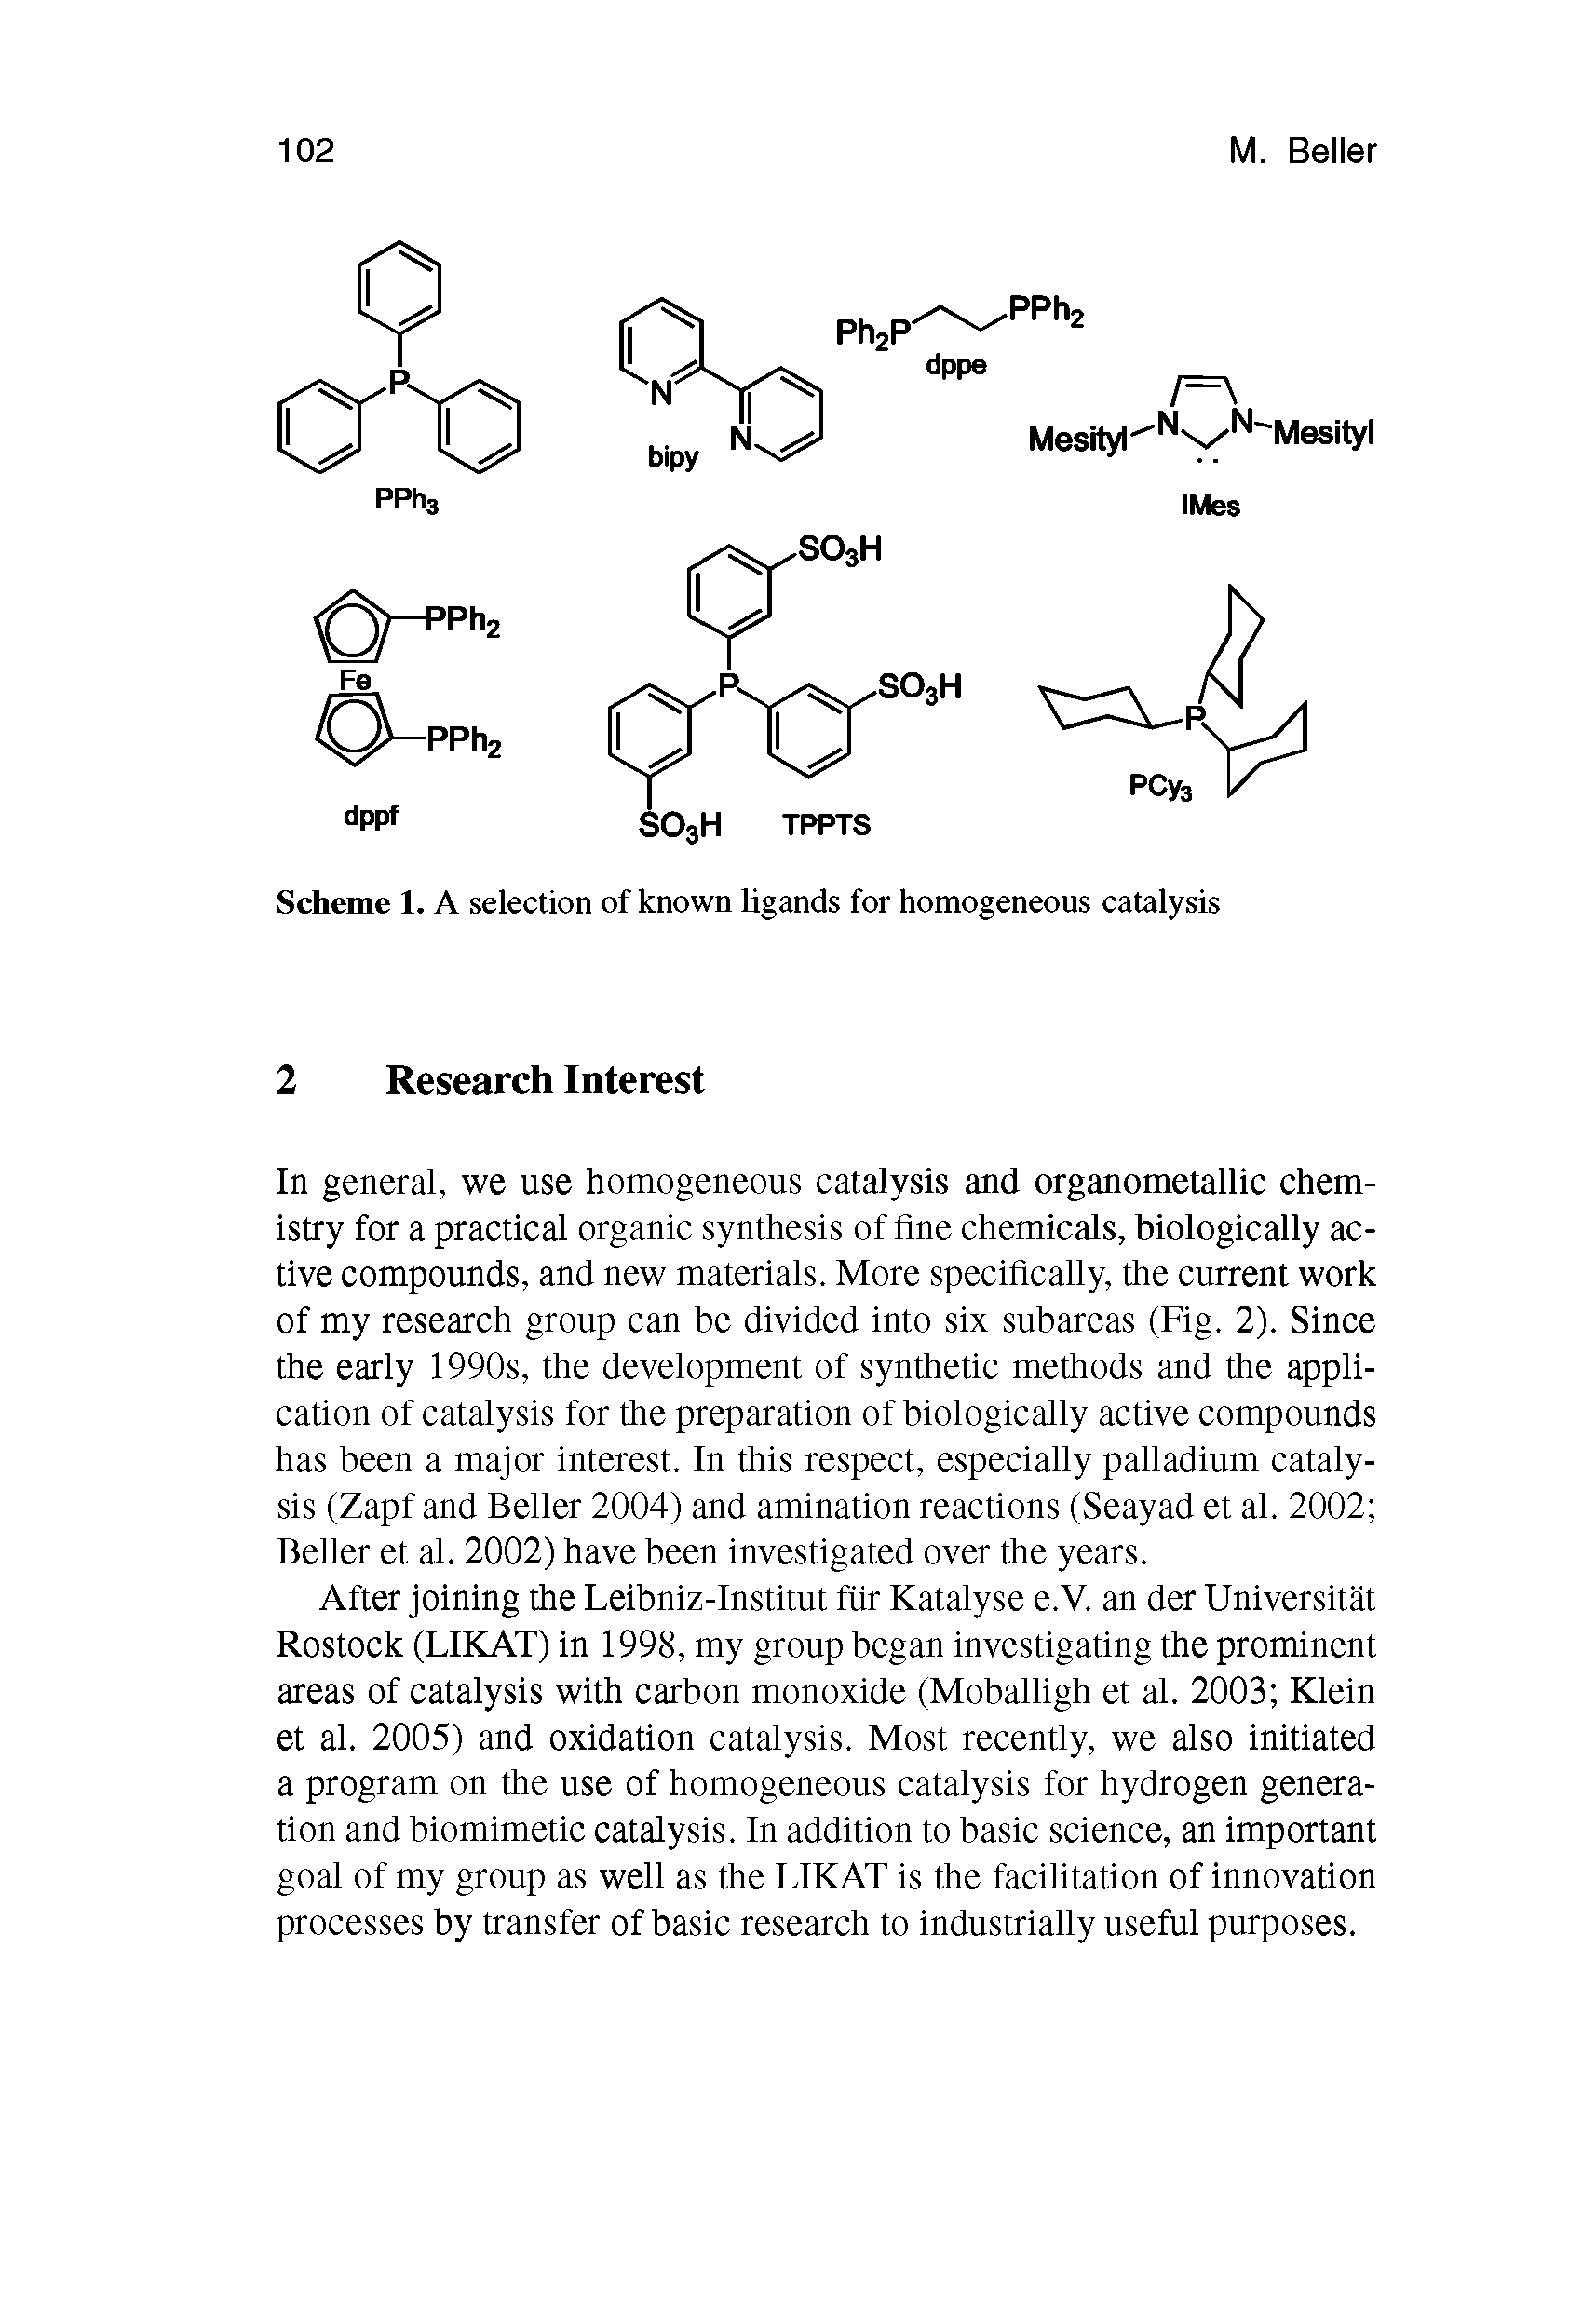 Scheme 1. A selection of known ligands for homogeneous catalysis...